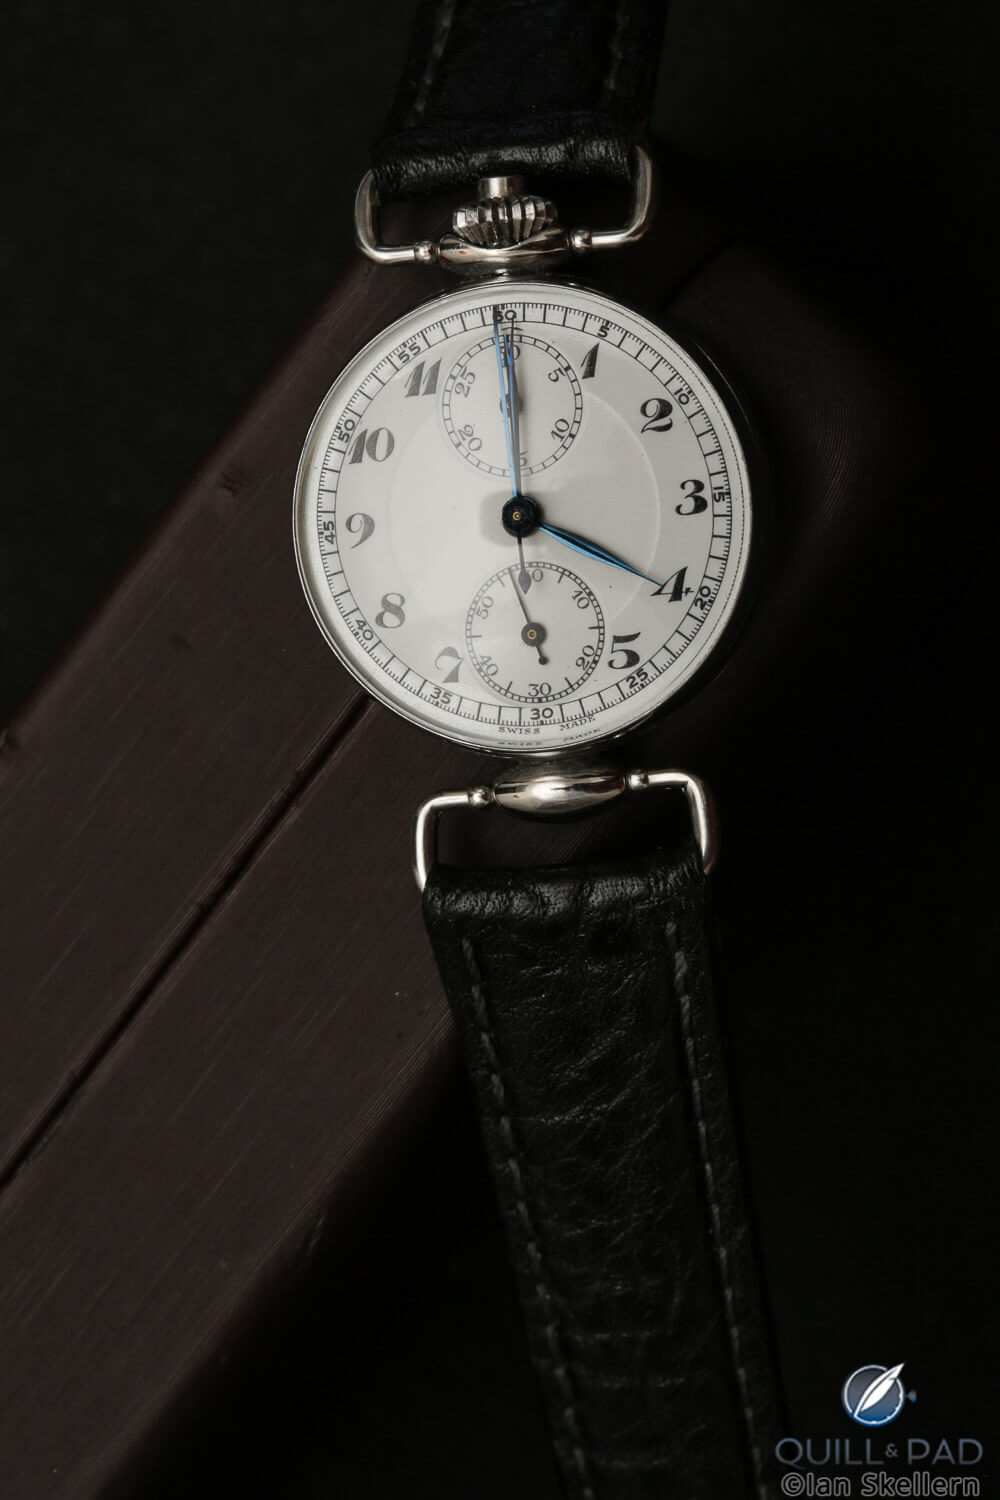 A Pontifa chronograph from about 1935 with vertical clutch from Gerd-Rüdiger Lang’s extensive chronograph collection